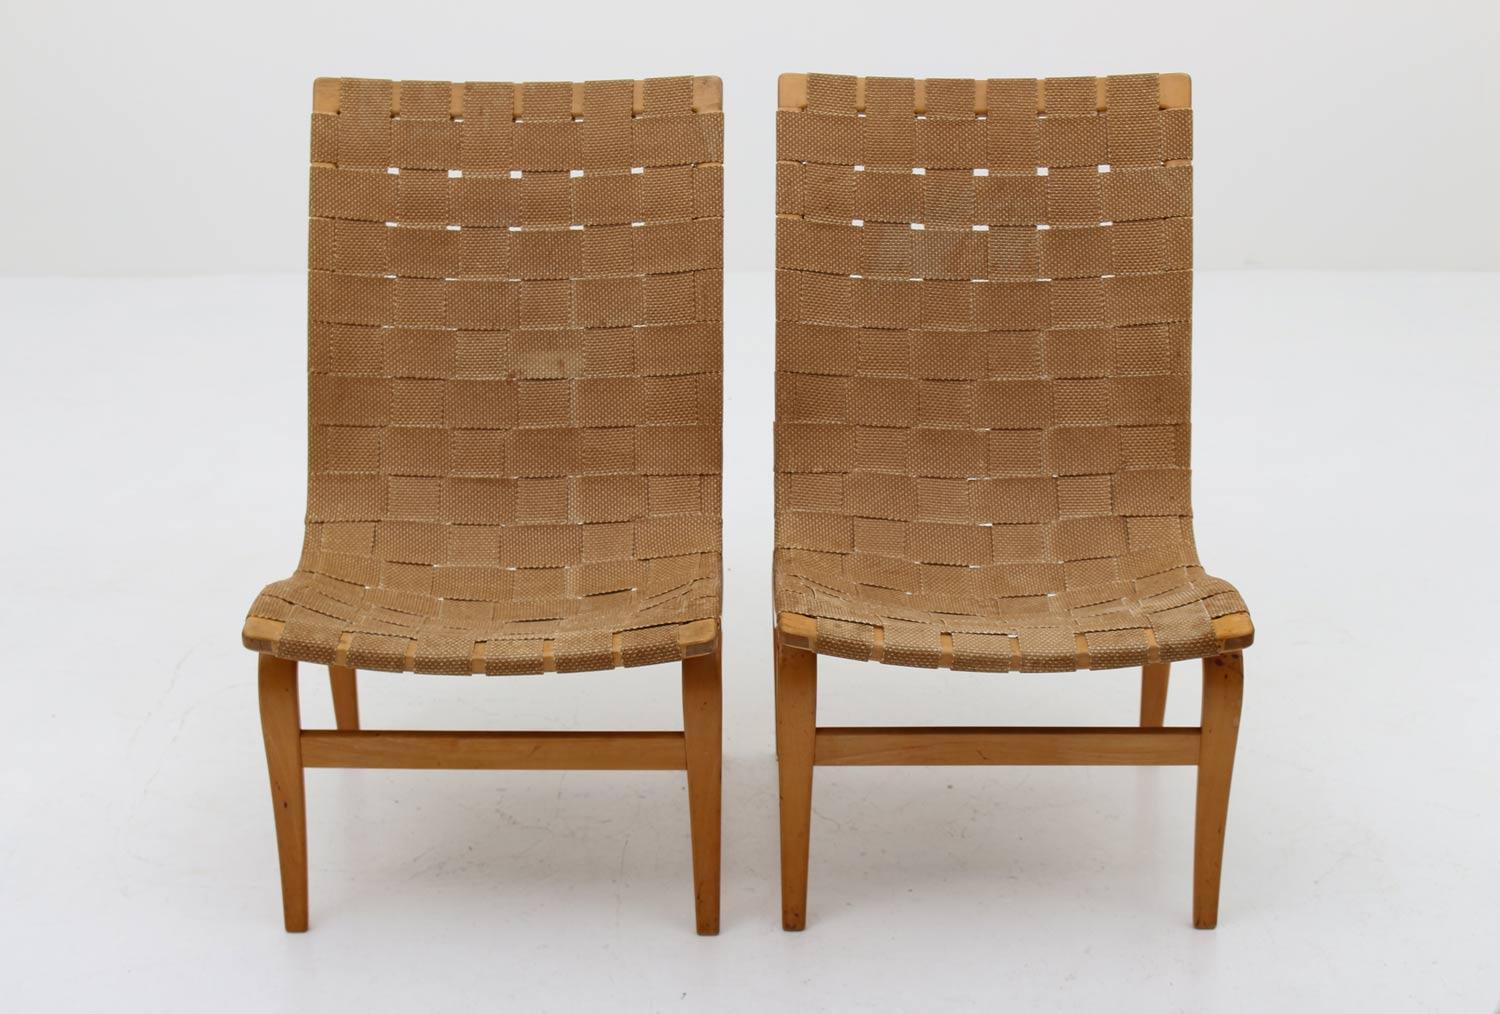 Gorgeous pair of “Arbetsstolen” lounge chairs by Bruno Mathsson for Karl Andersson & Söner, Sweden, 1940s.
This early pair is made with paper webbing, due to loss of hemp during the Second World War.
Condition: Great original condition with perfect